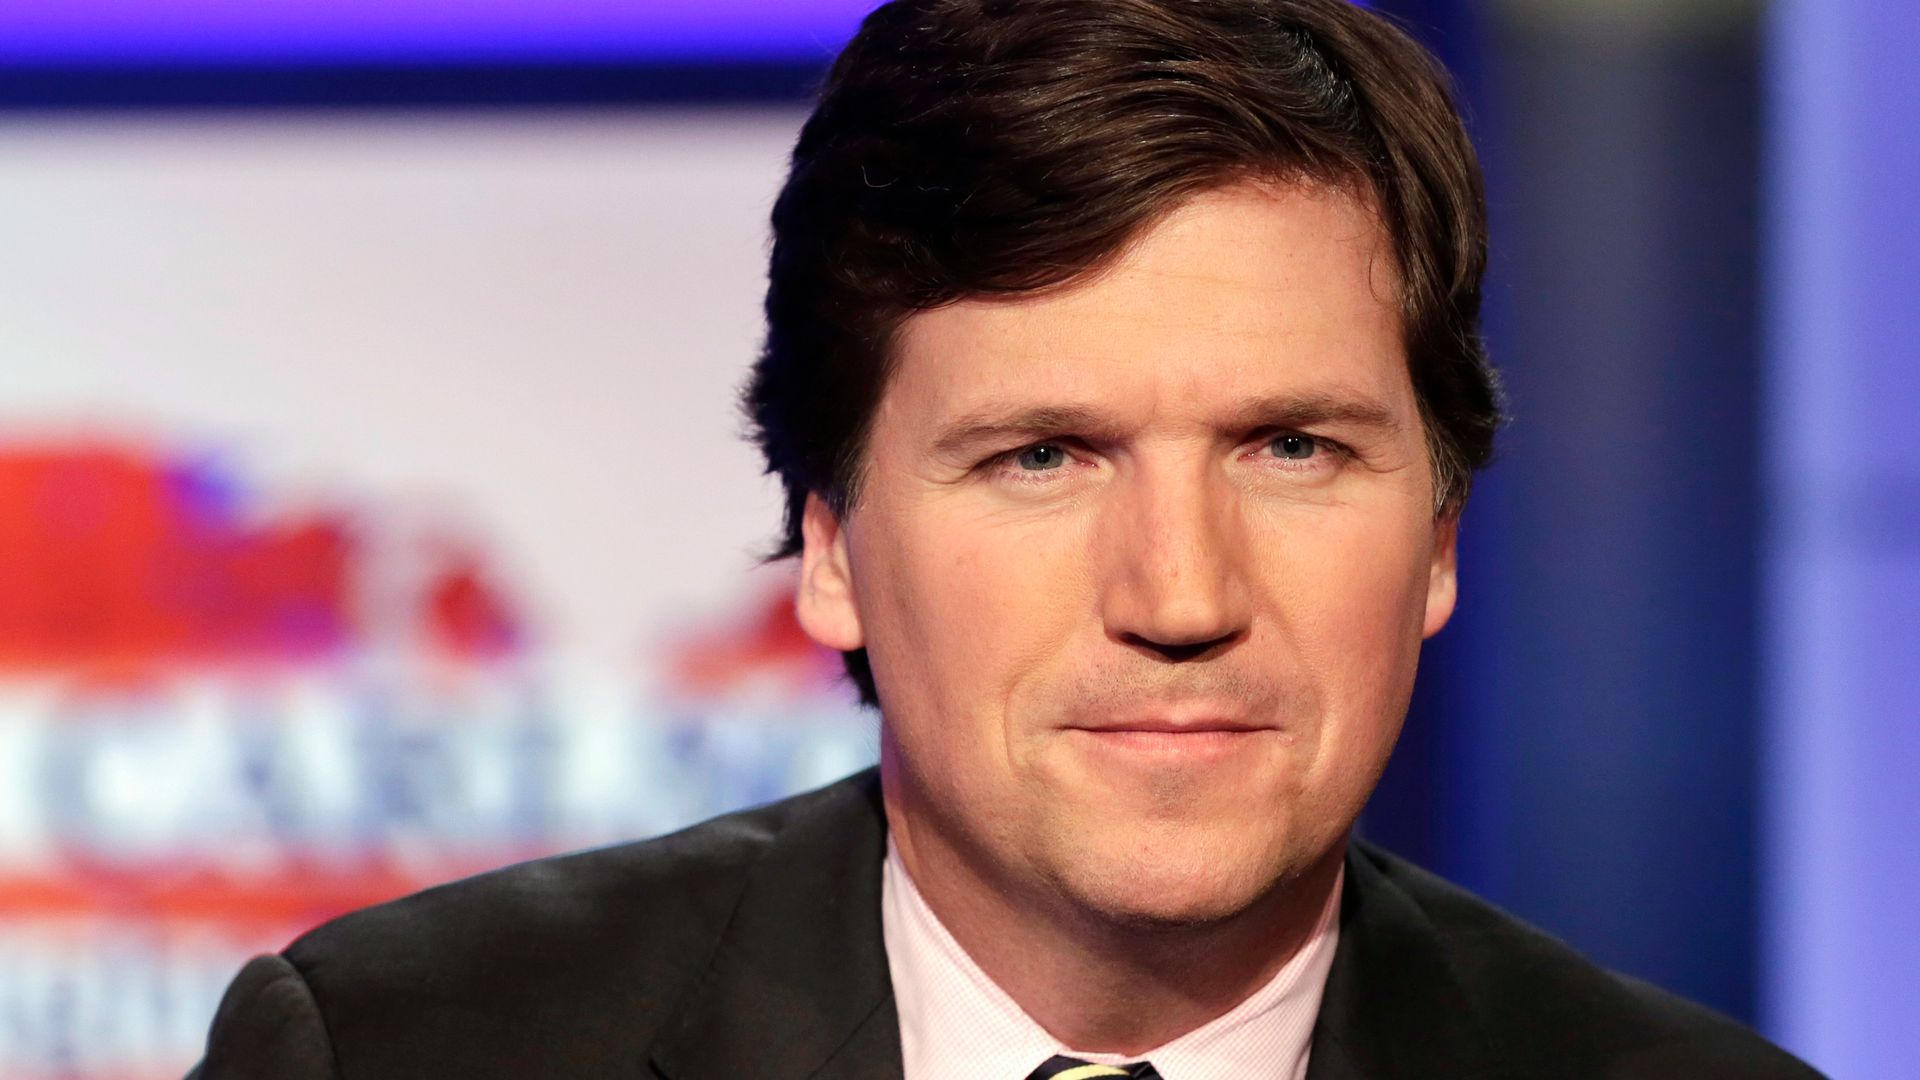 Tucker Carlson is a propagandist for the far- right, from Donald Trump to Vladimir Putin, and he’s only going to keep getting worse from here.